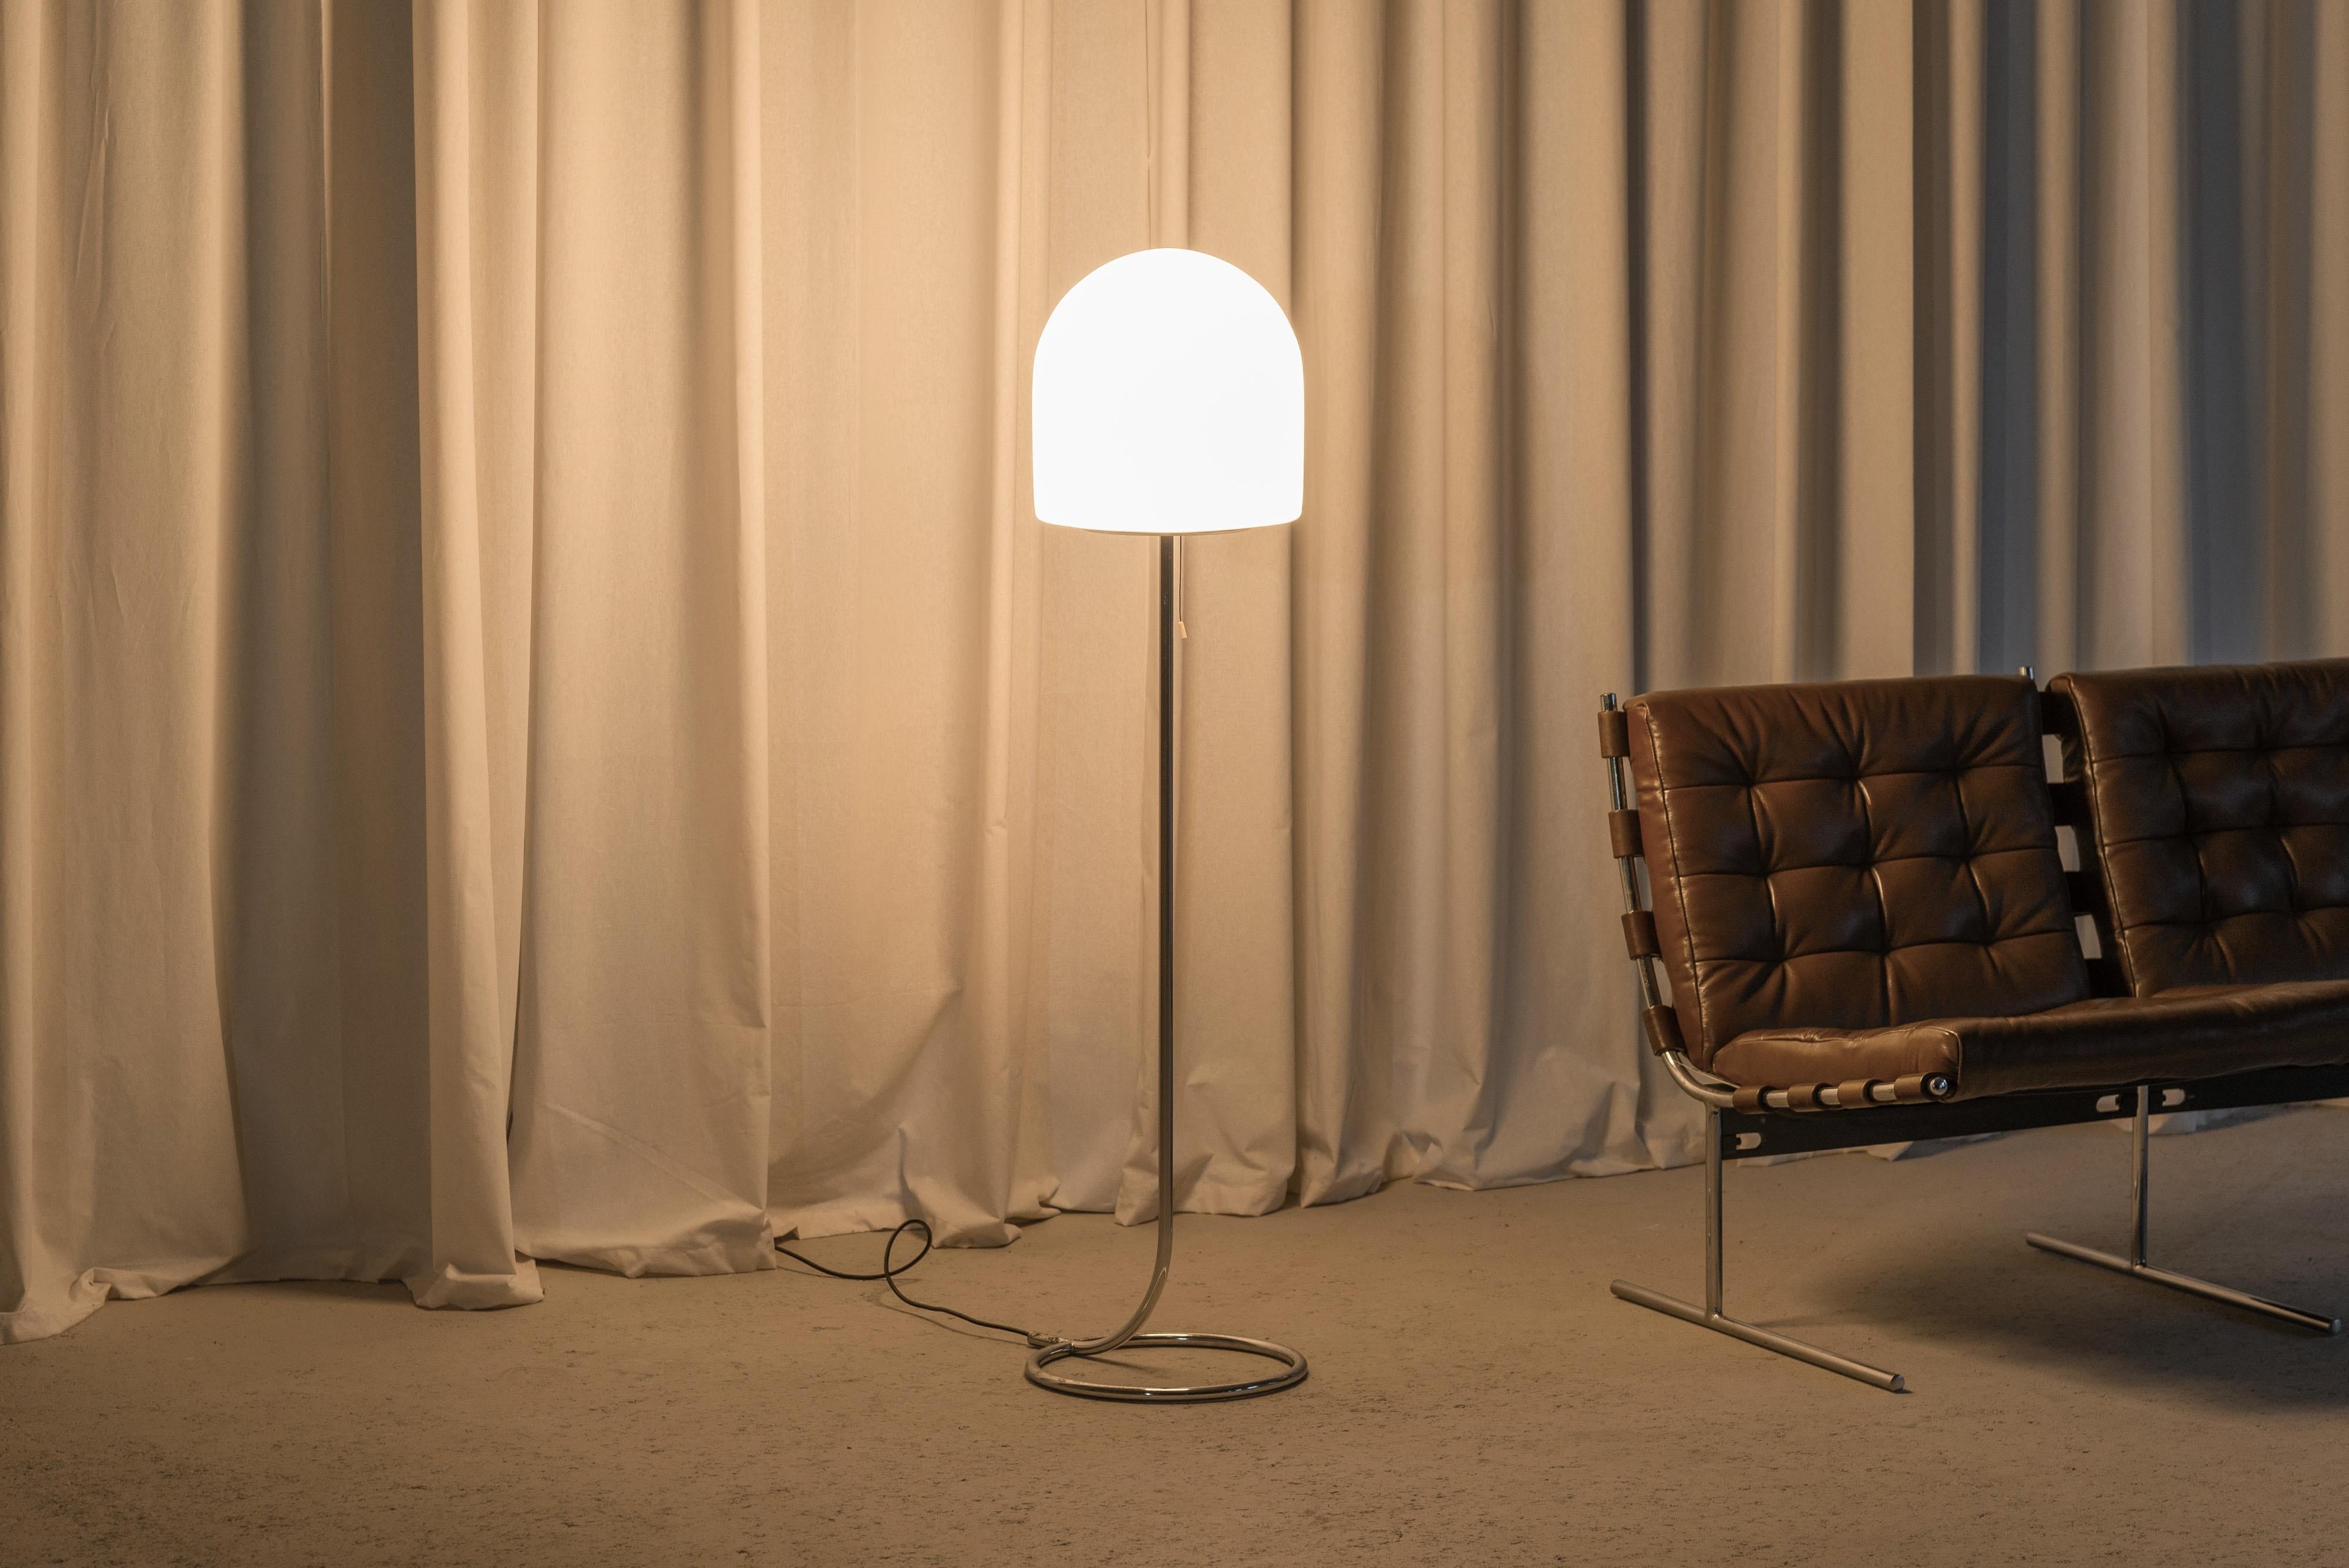 Minimalist floor lamp model A251 designed by Aldo van den Nieuwelaar and manufactured by Artimeta in the Netherlands in 1972. It's made of matt chrome-plated steel with a unique dome shaped frosted milk-white glass shade. The slim stem smoothly